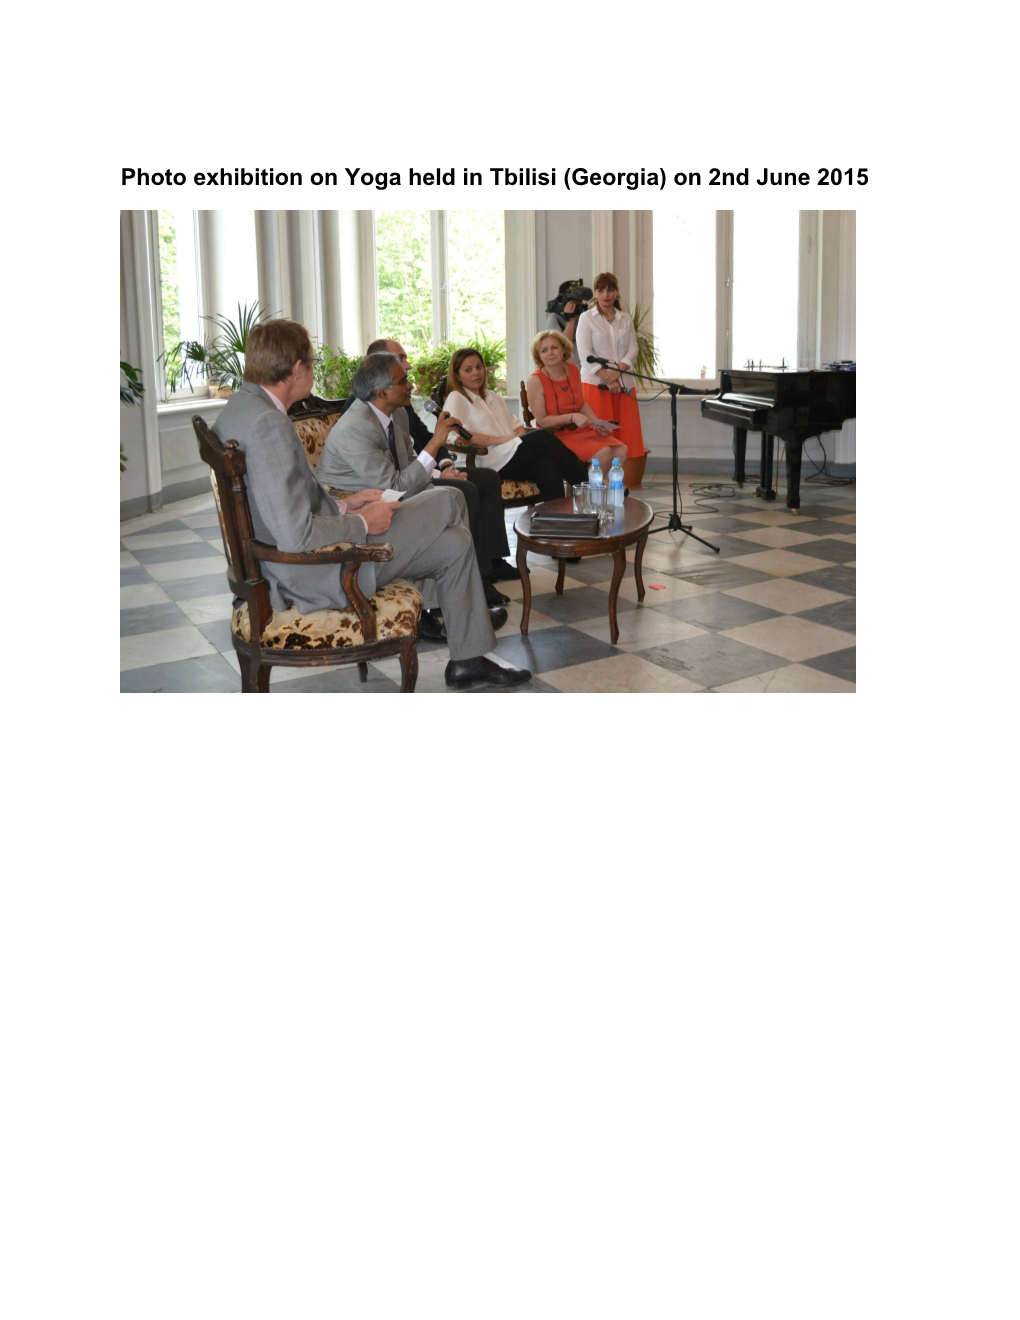 Photo Exhibition on Yoga Held in Tbilisi (Georgia) on 2Nd June 2015